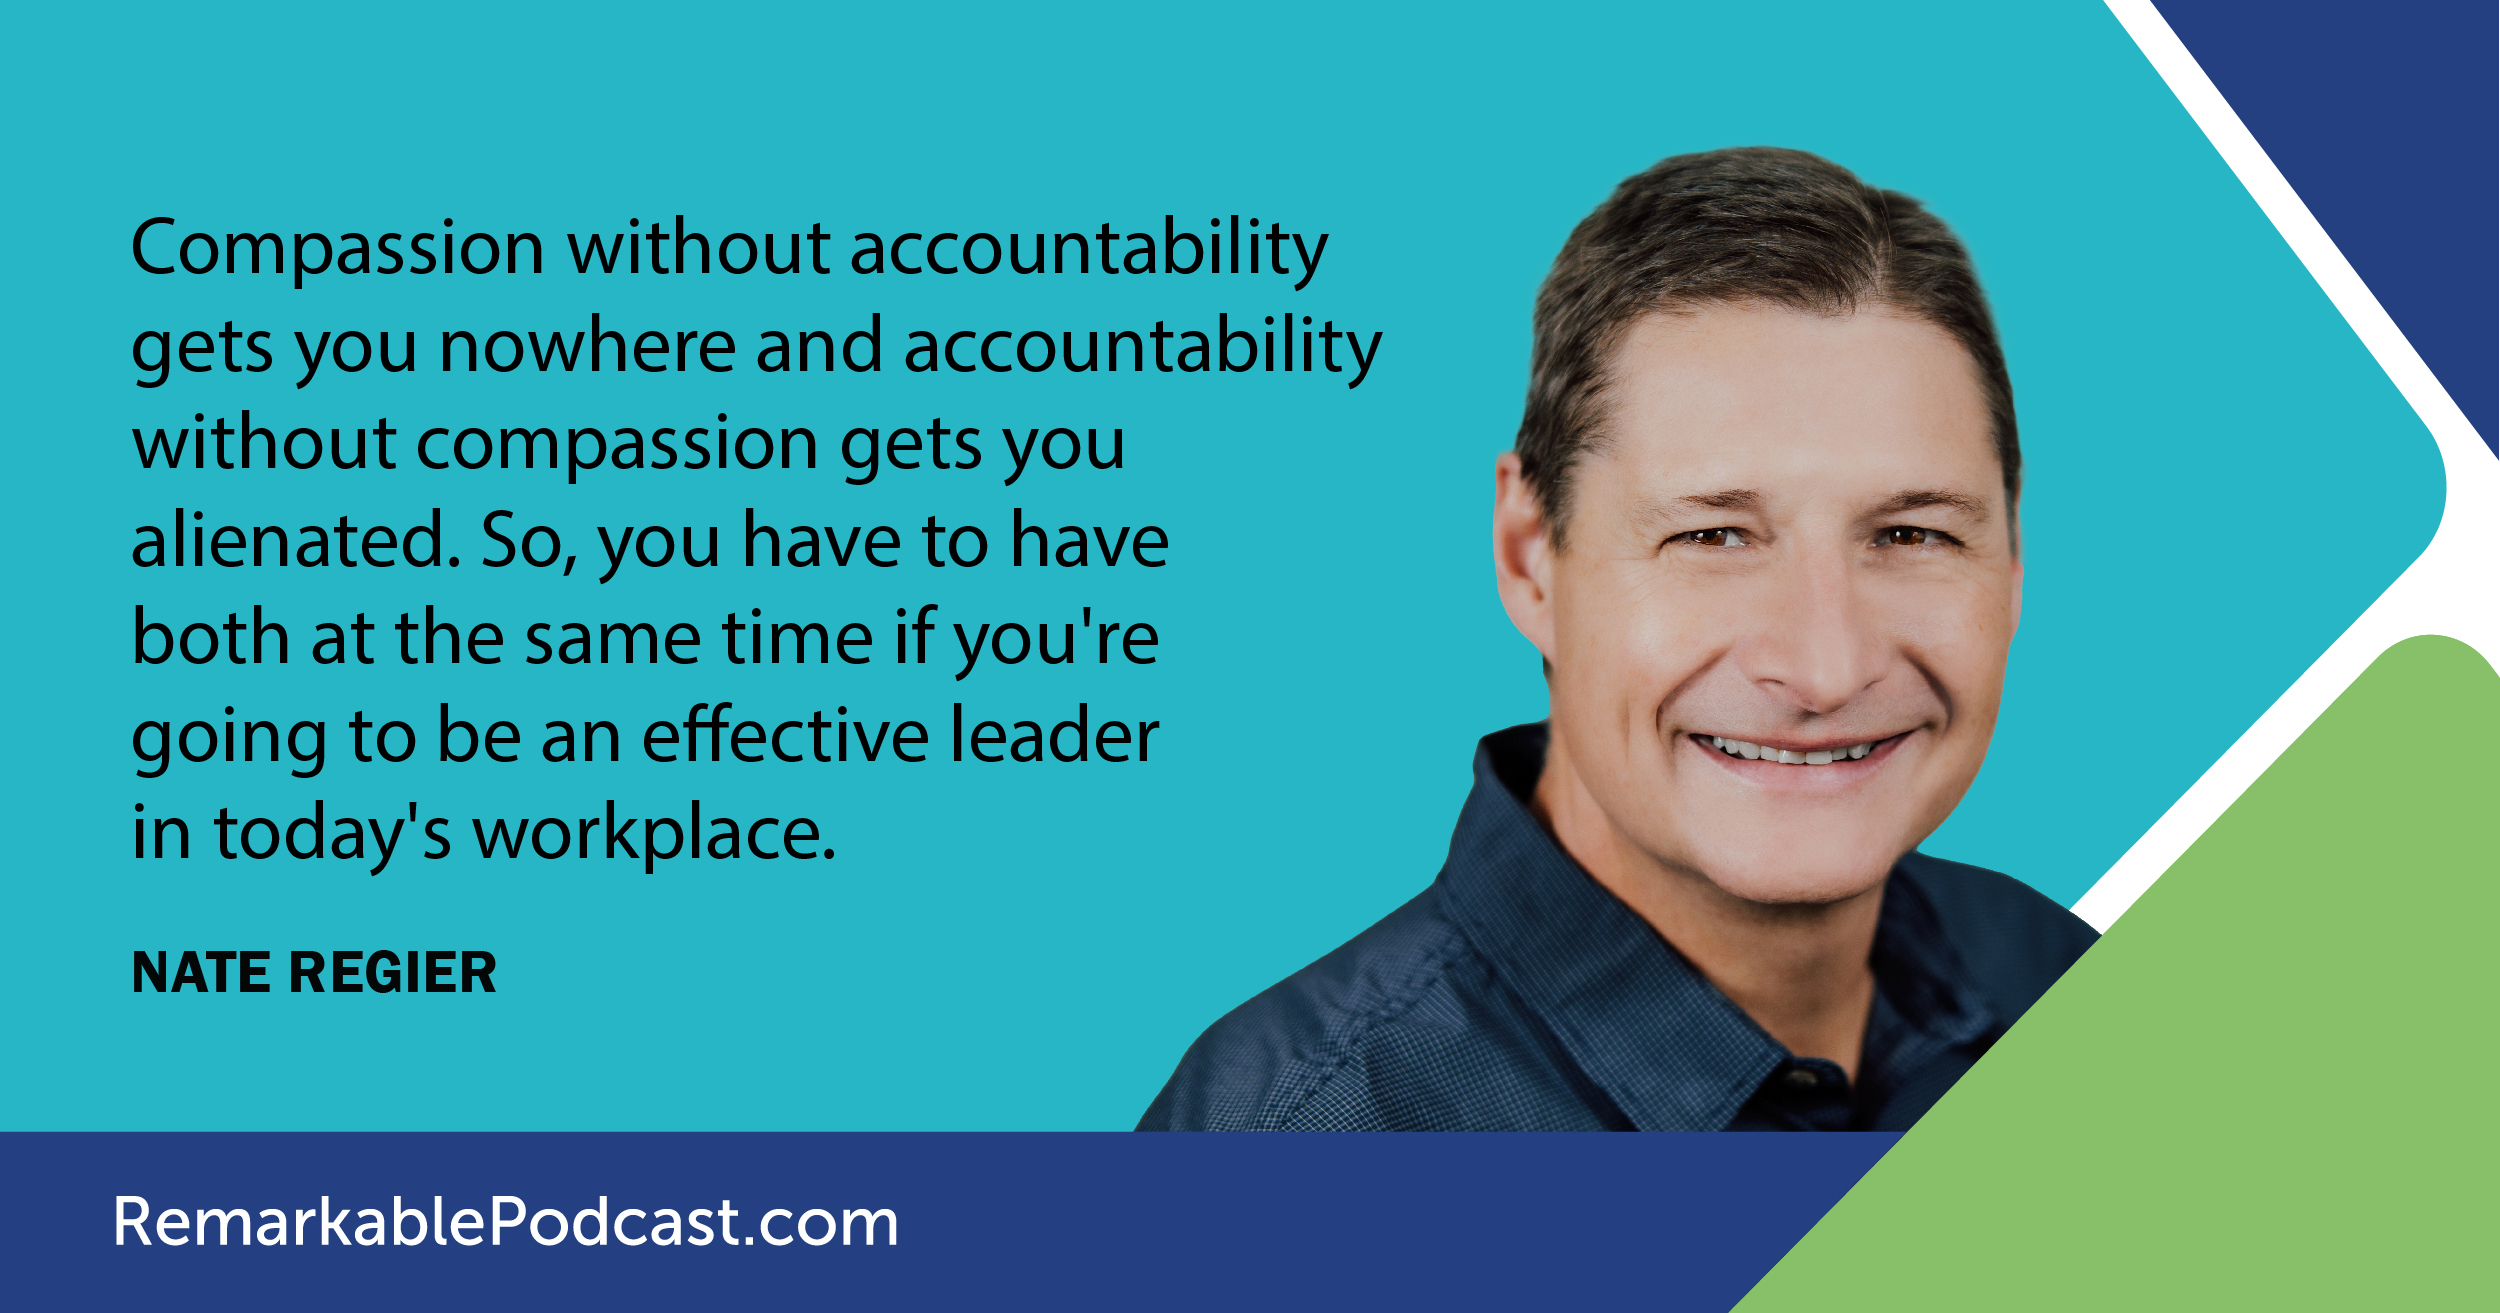 Compassion without accountability gets you nowhere and accountability without compassion gets you alienated. So, you have to have both at the same time if you're going to be an effective leader in today's workplace. Said by Nate Regier in The Remarkable Leadership Podcast